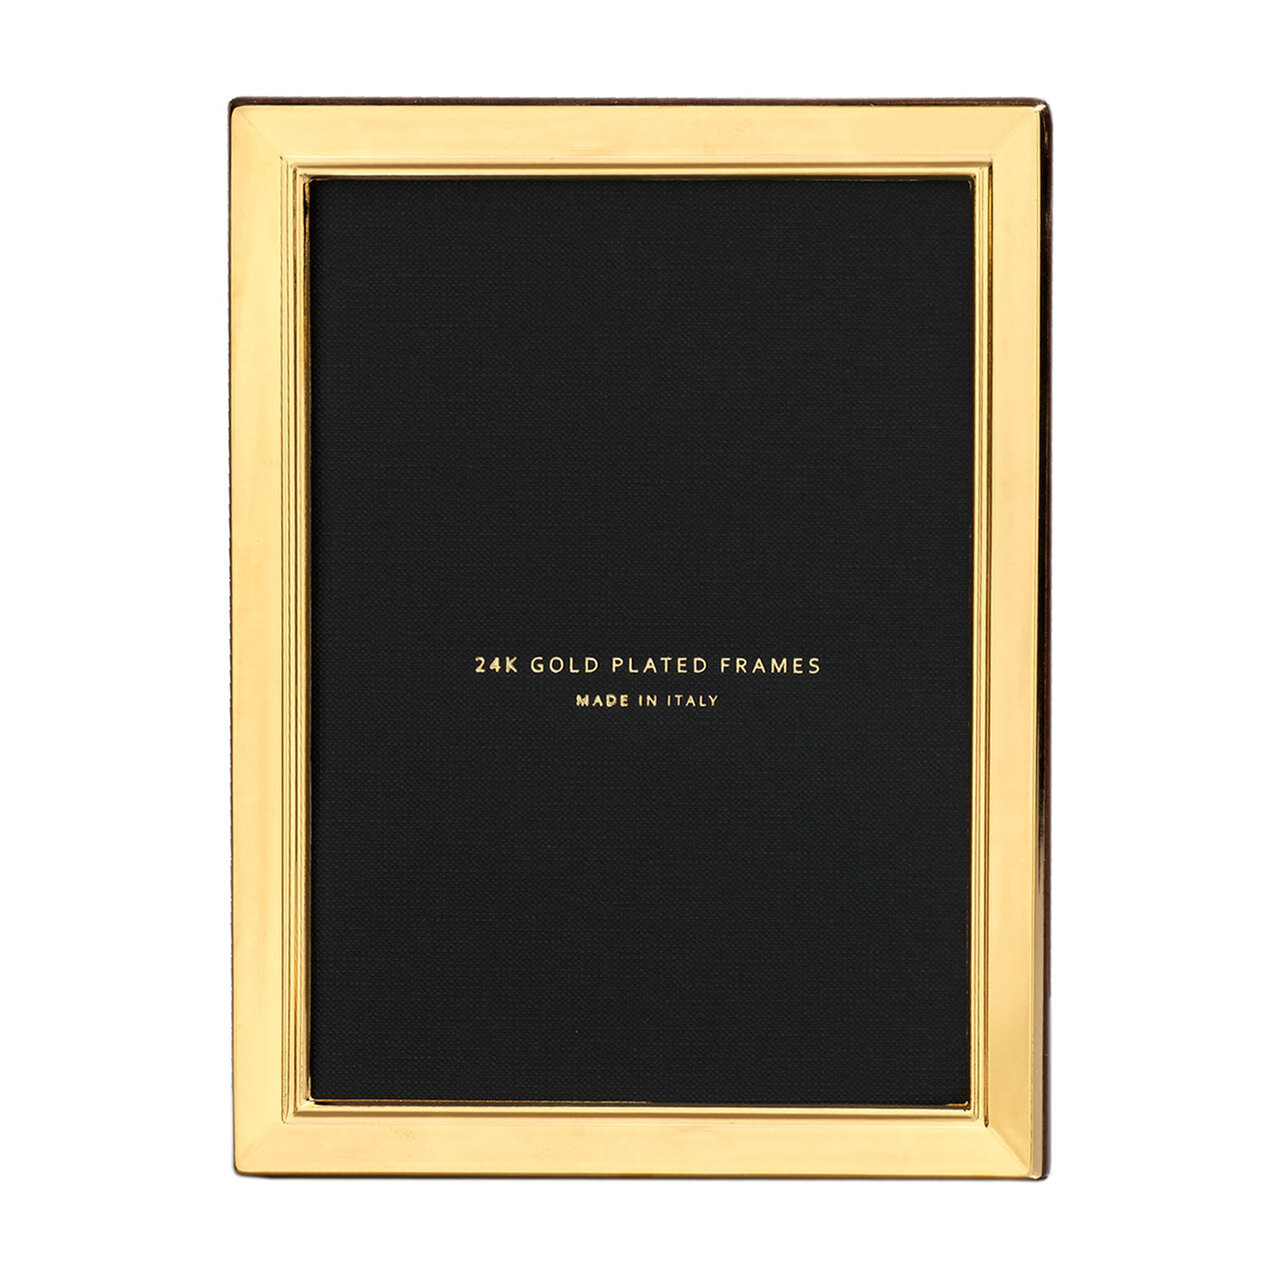 Cunill Metropolis 8 x 10 Inch Picture Frame - 24k Gold Plated 0.5 Microns